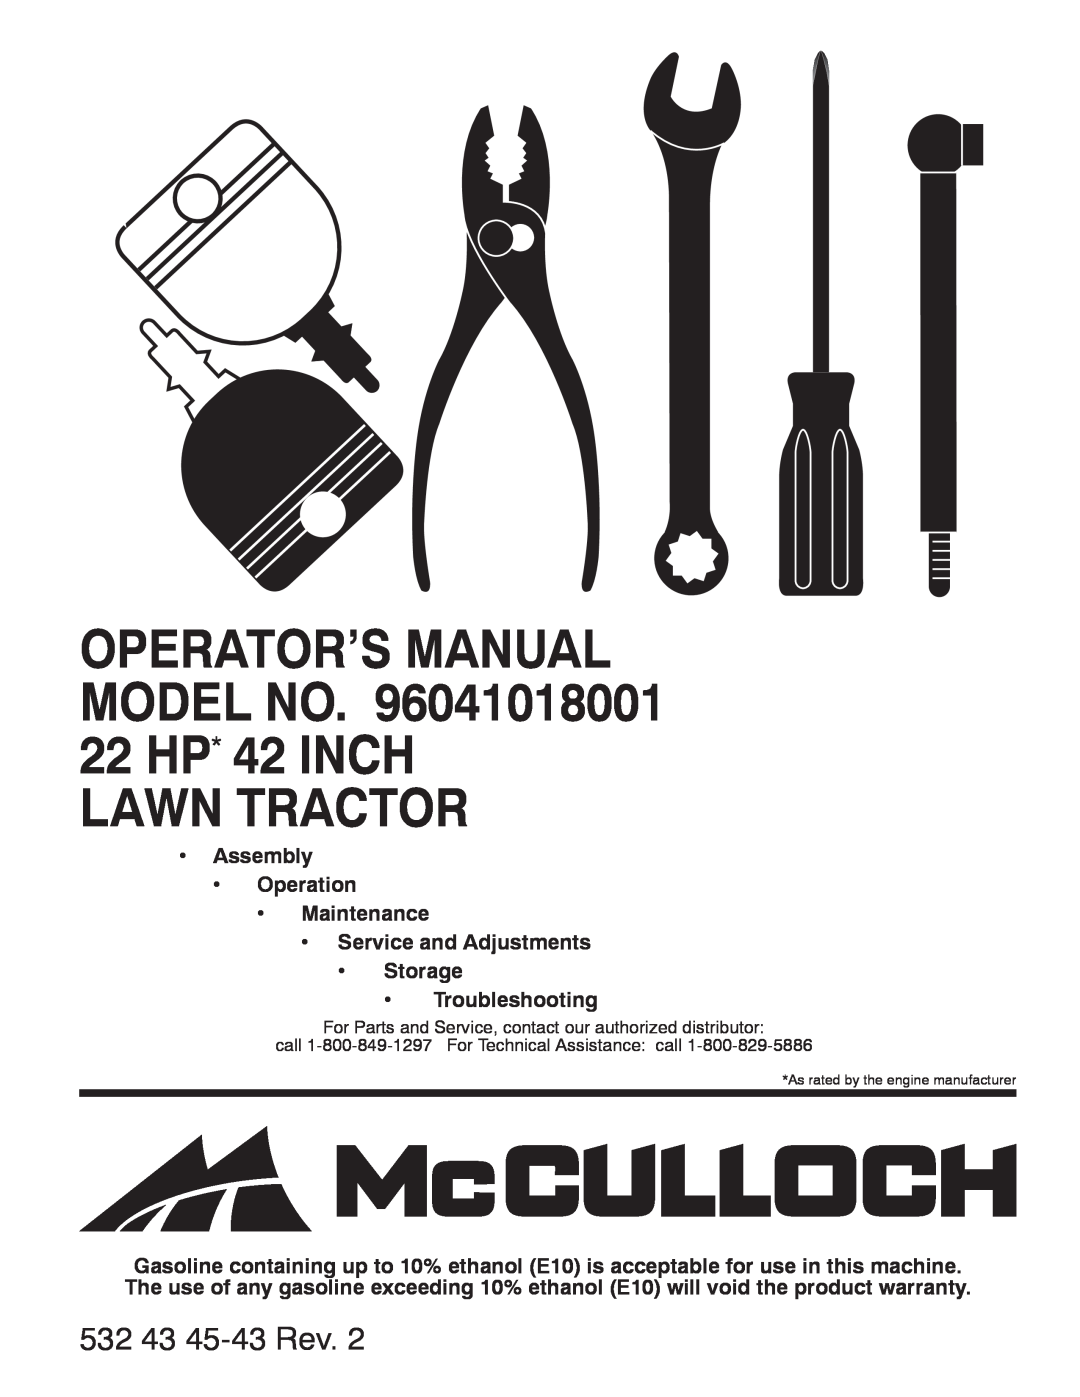 McCulloch 96041018001 manual OPERATOR’S MANUAL MODEL NO 22 HP* 42 INCH LAWN TRACTOR, 532 43 45-43 Rev, Troubleshooting 